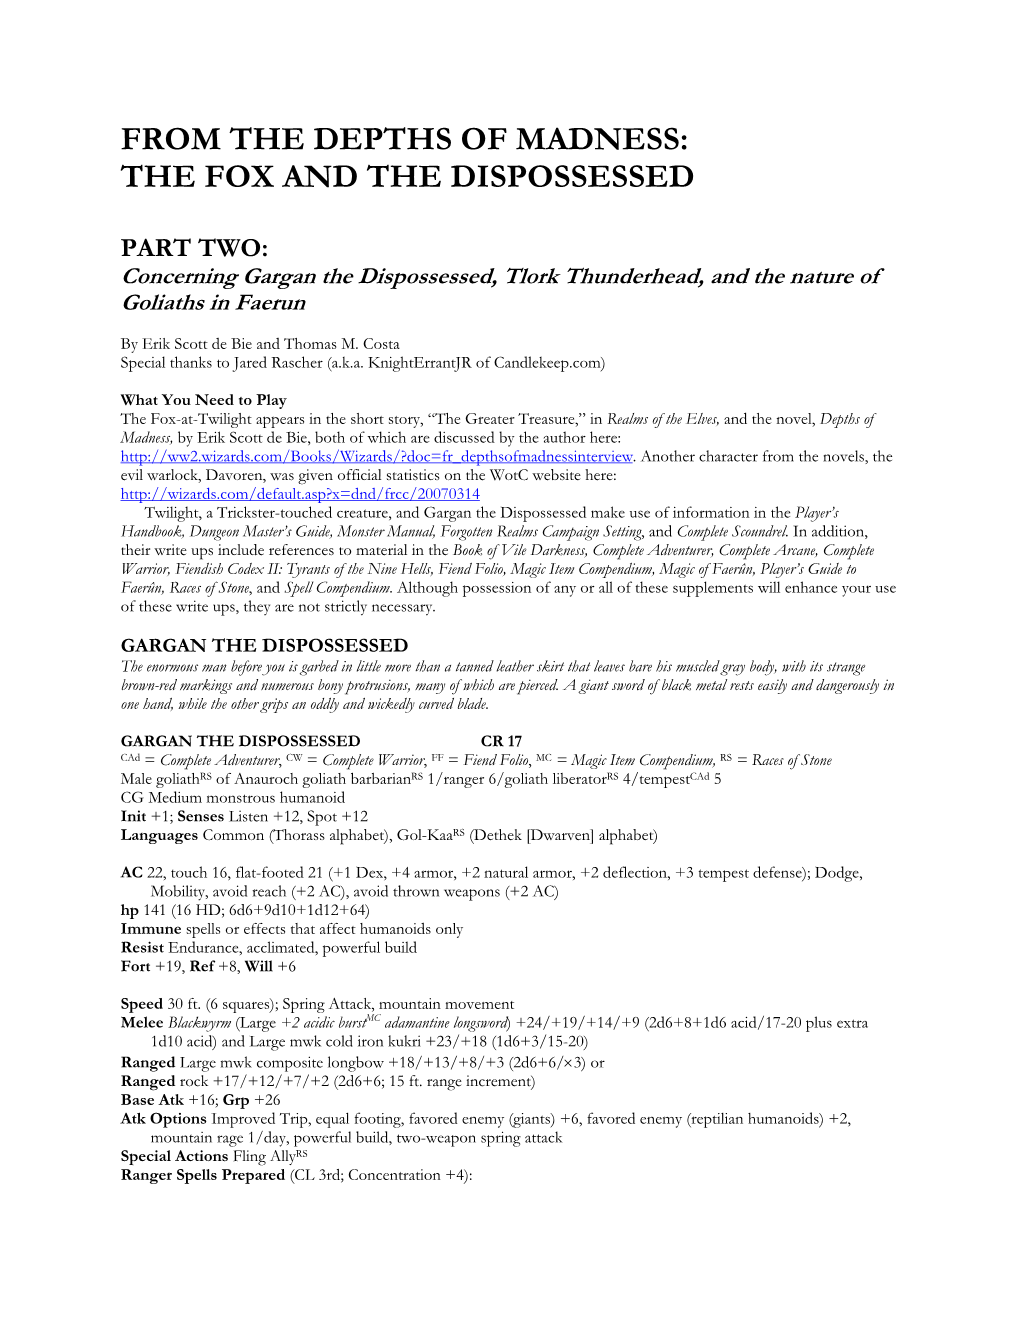 From the Depths of Madness: the Fox and the Dispossessed